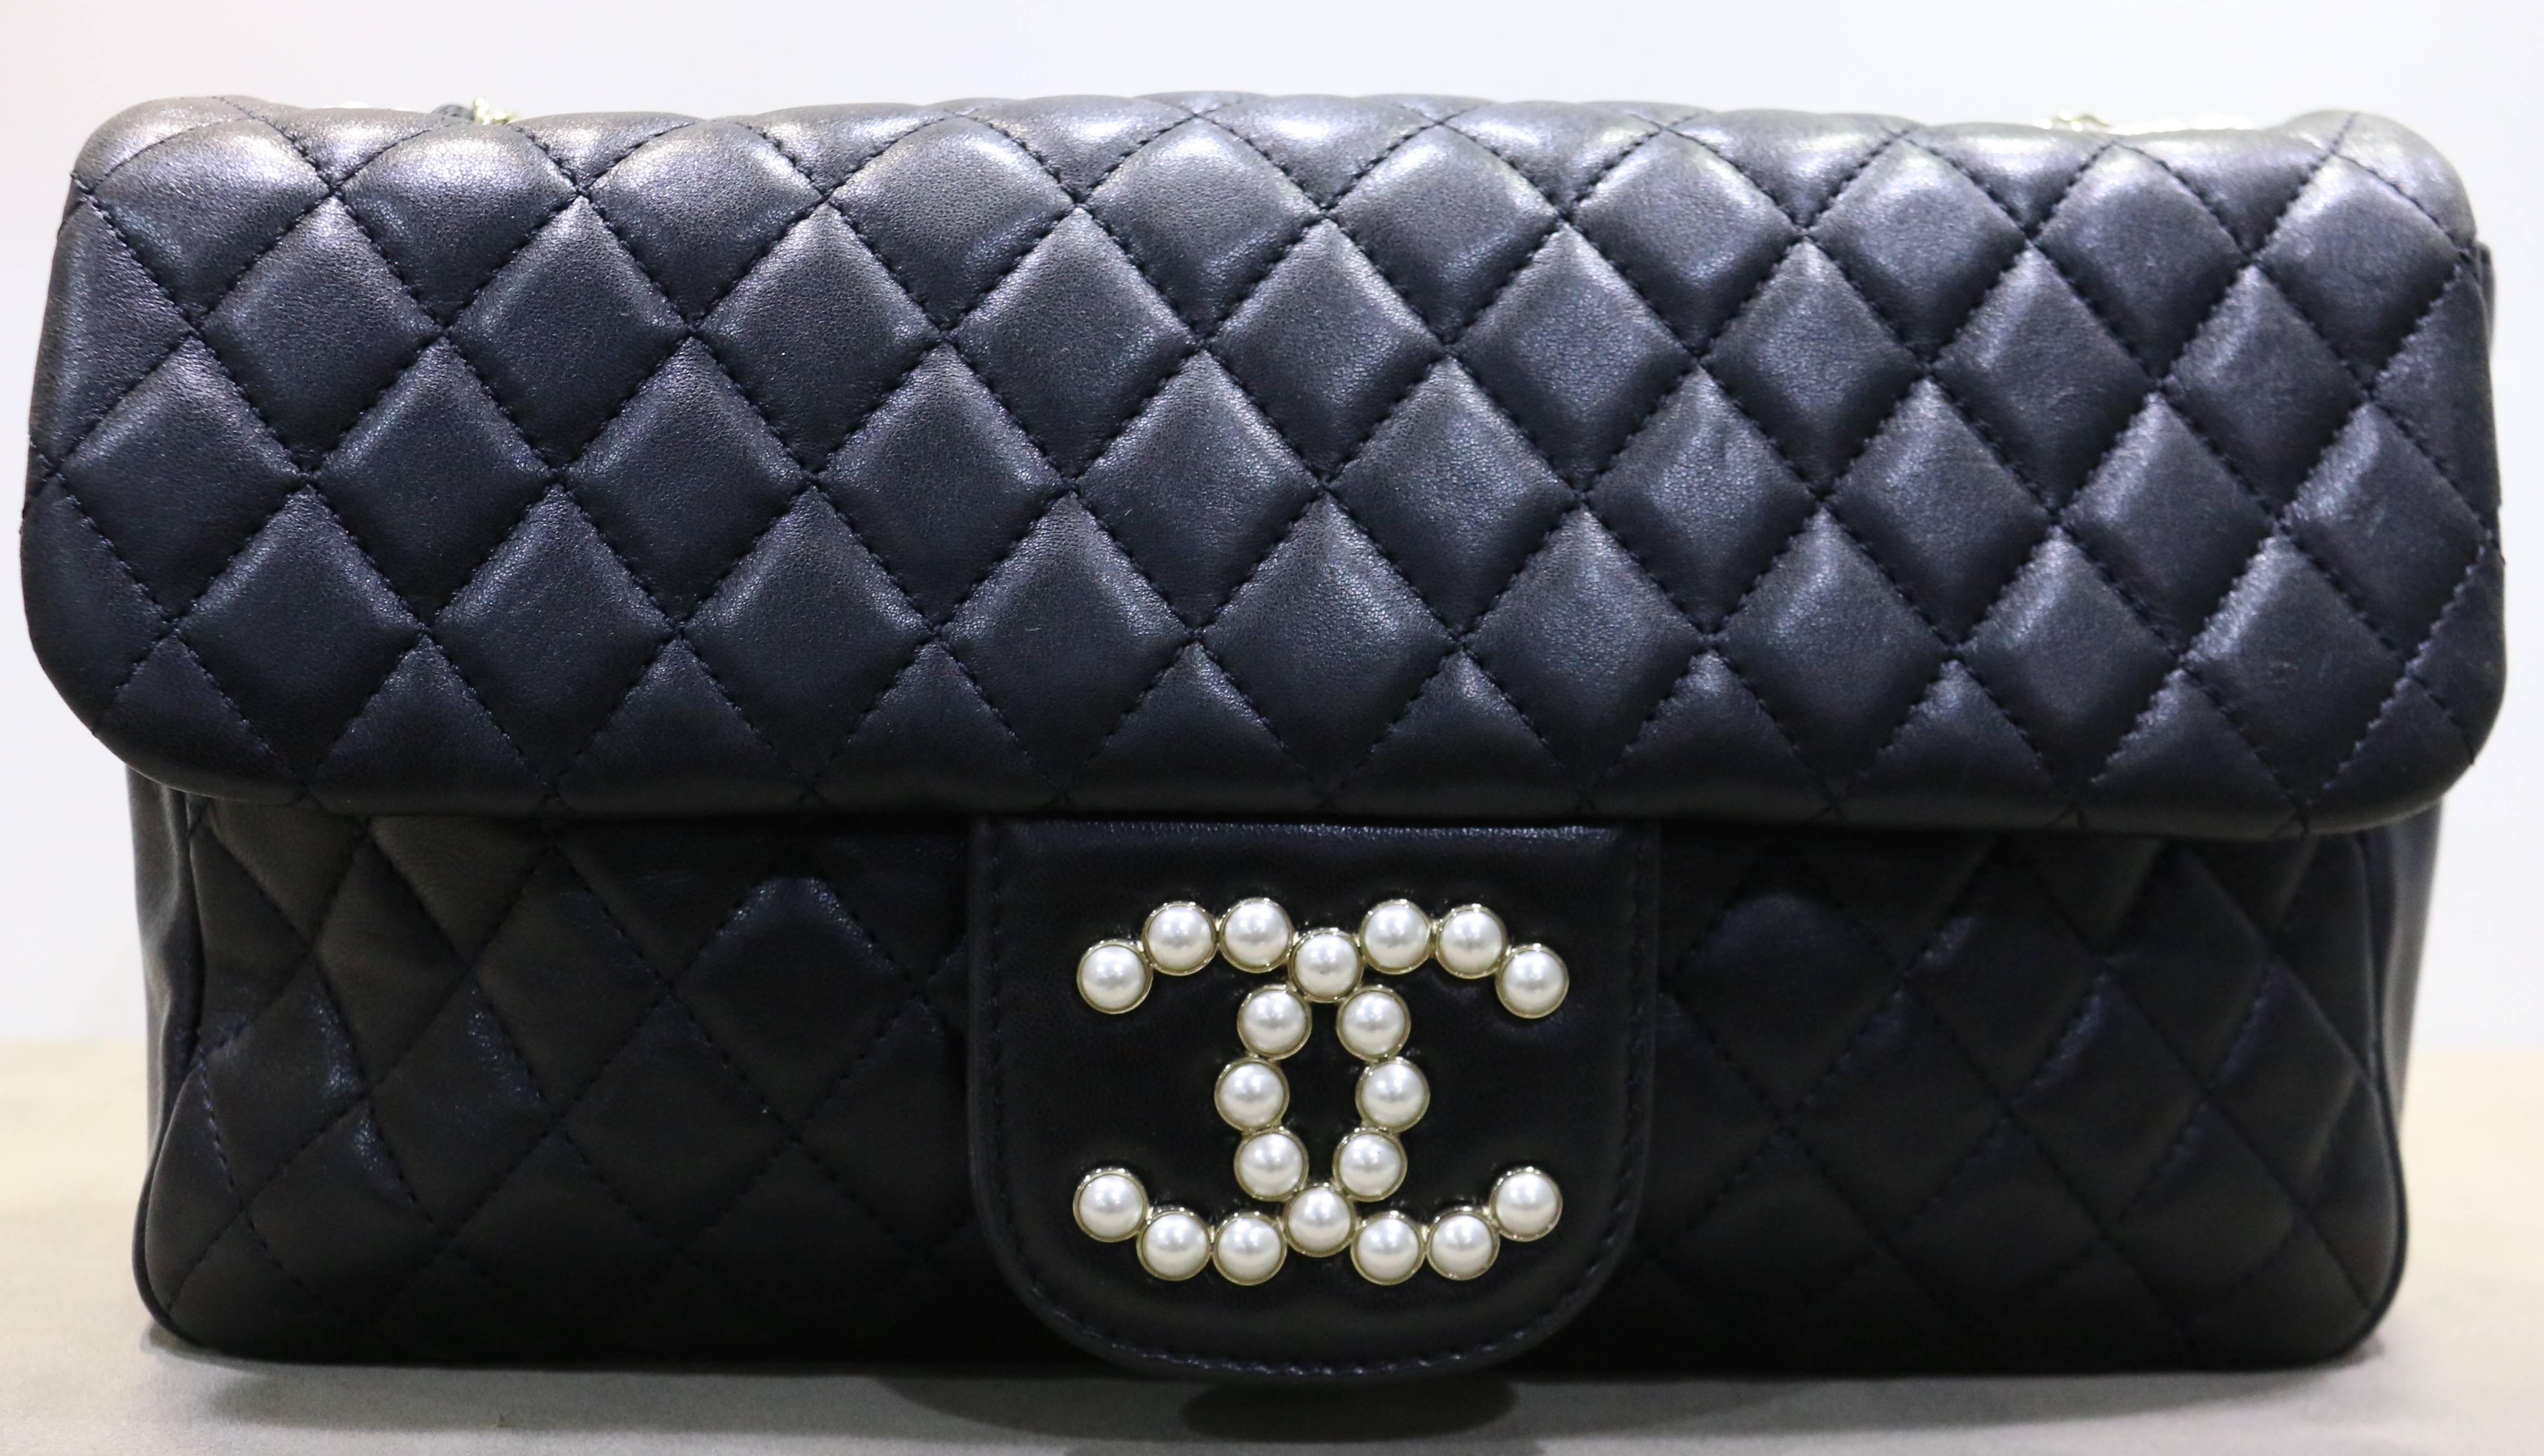 - Chanel black lambskin westminster quilted pearl medium flap bag . 

- Featuring  pearl, small chain and large chain shoulder straps and a cross over flap with a Chanel CC Mademoiselle faux turn lock.

- Length: 10 inches. Height: 6 inches.